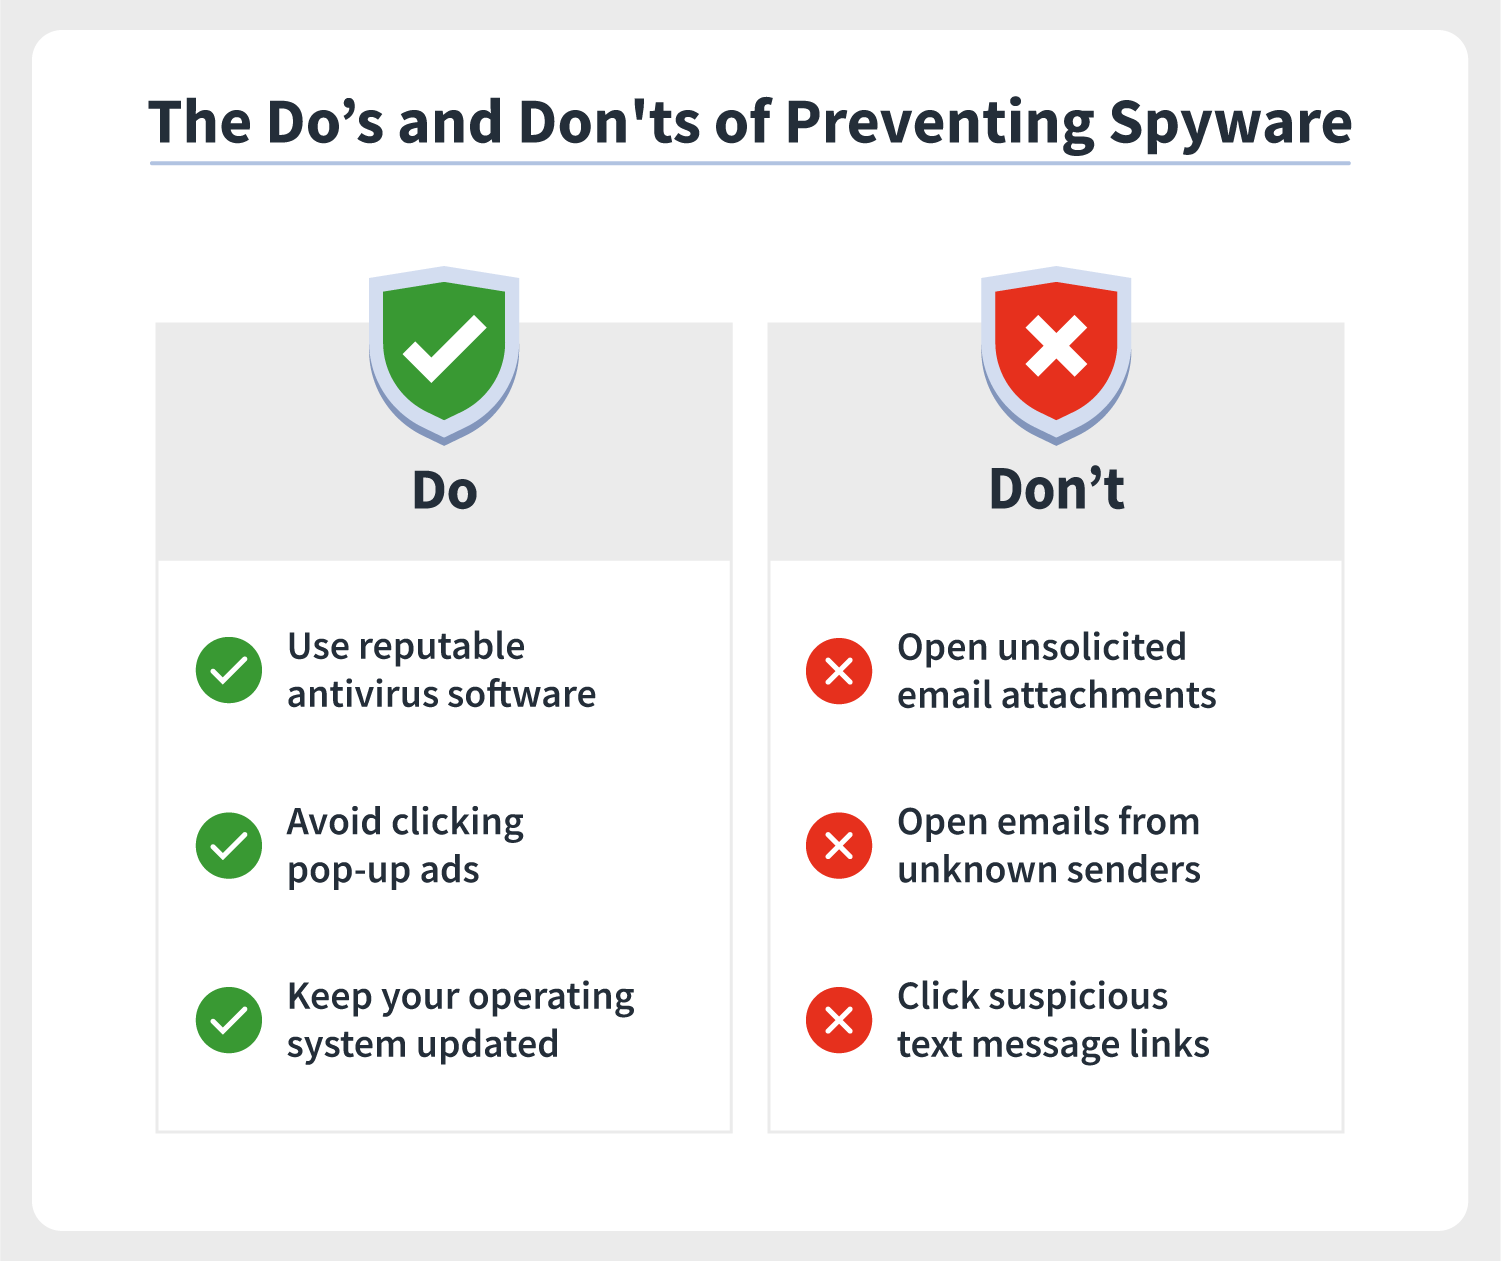 A chart overviews how to prevent spyware infections with a list of three do's and three don'ts.